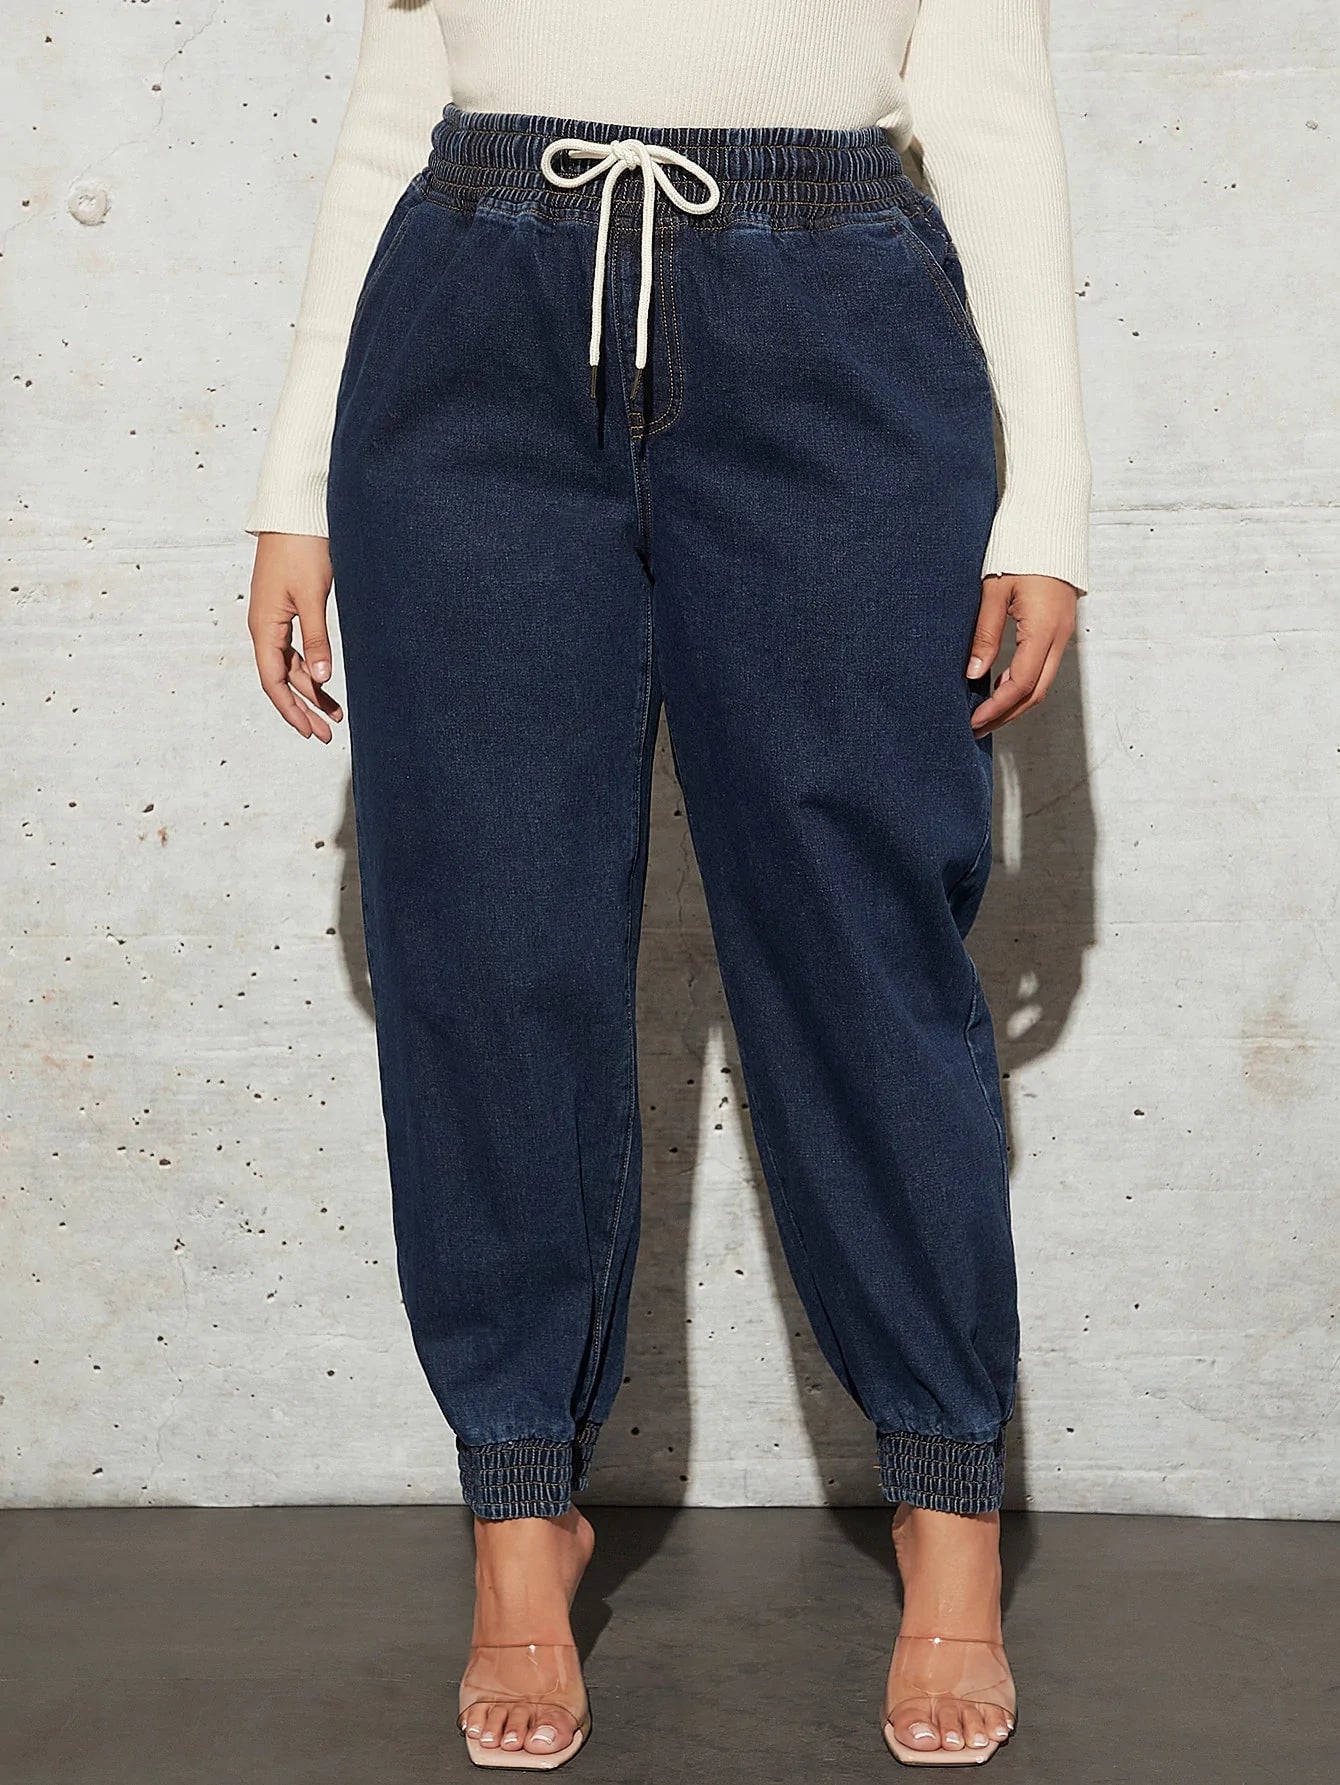 taglie forti Jeans jogger con coulisse